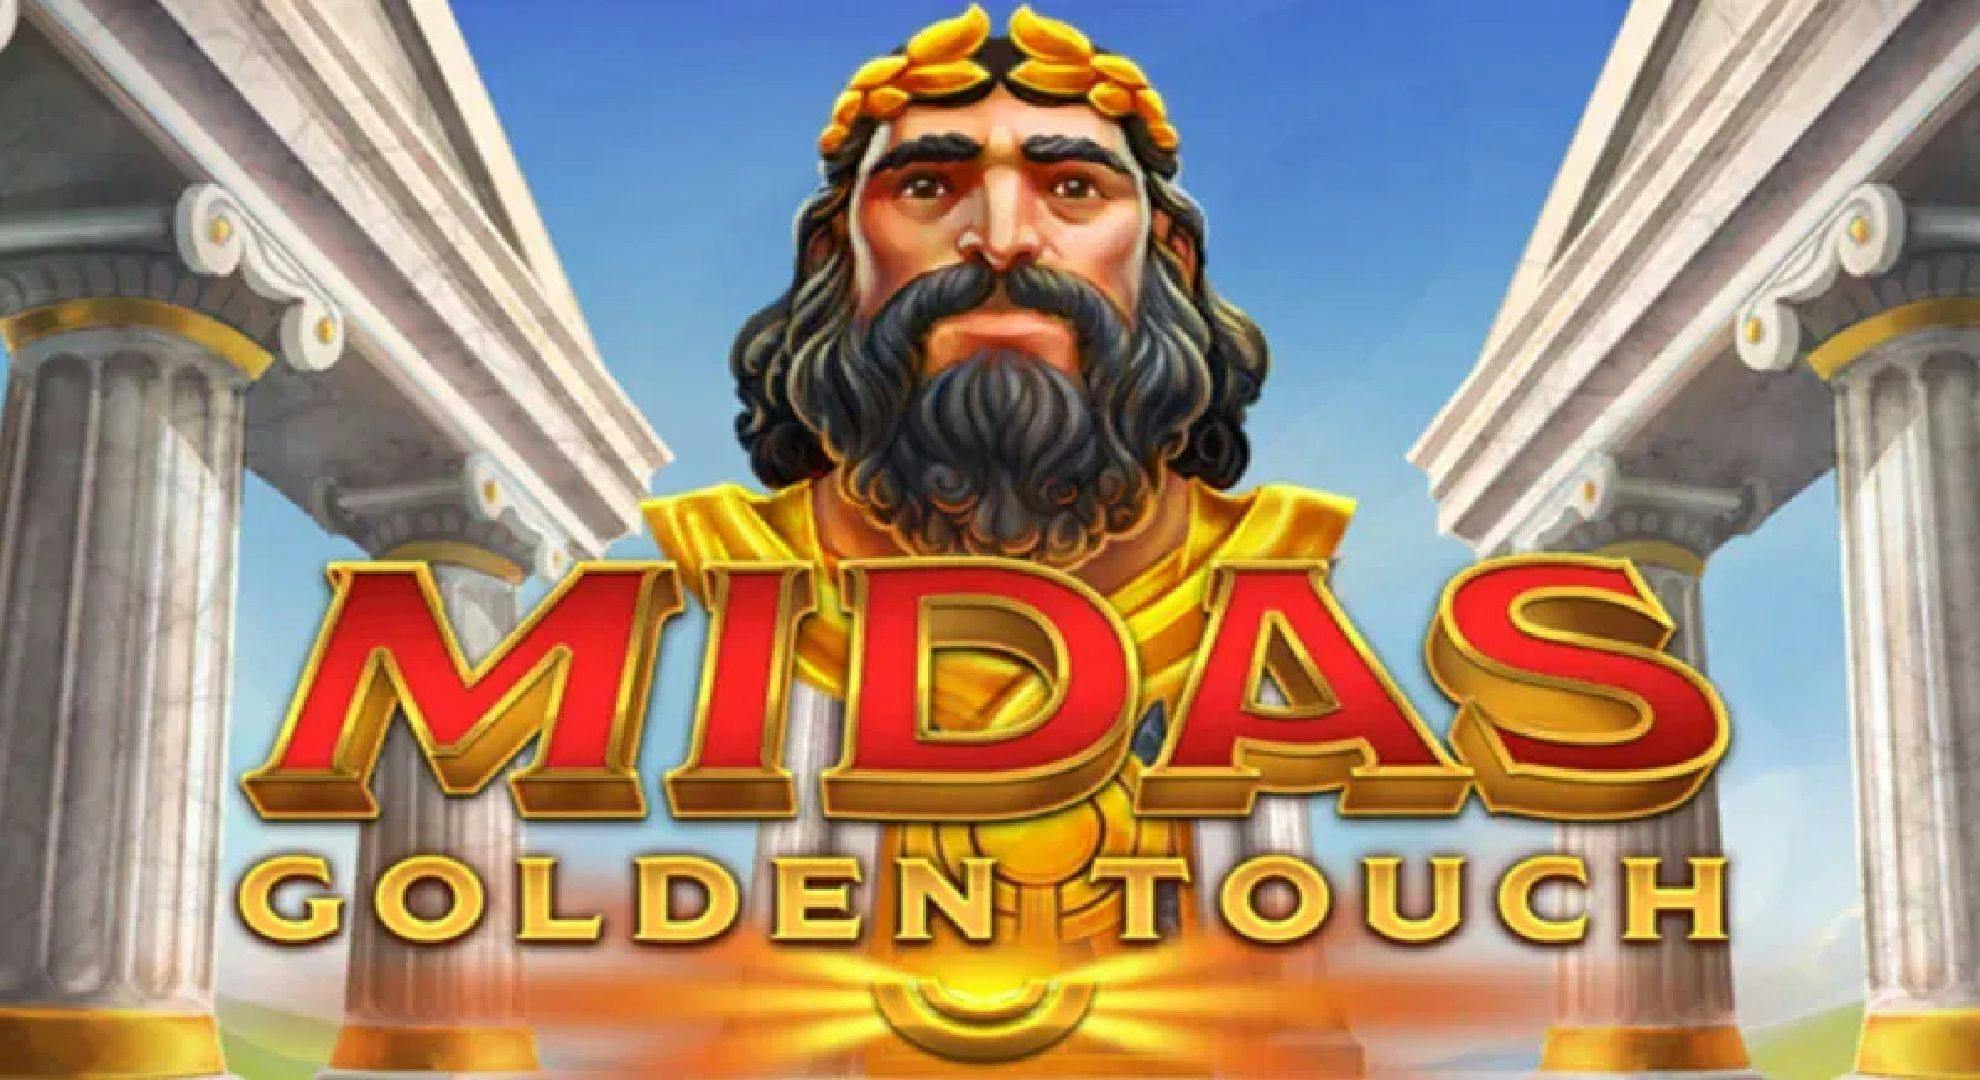 Midas Golden Touch Slot Online Free Play